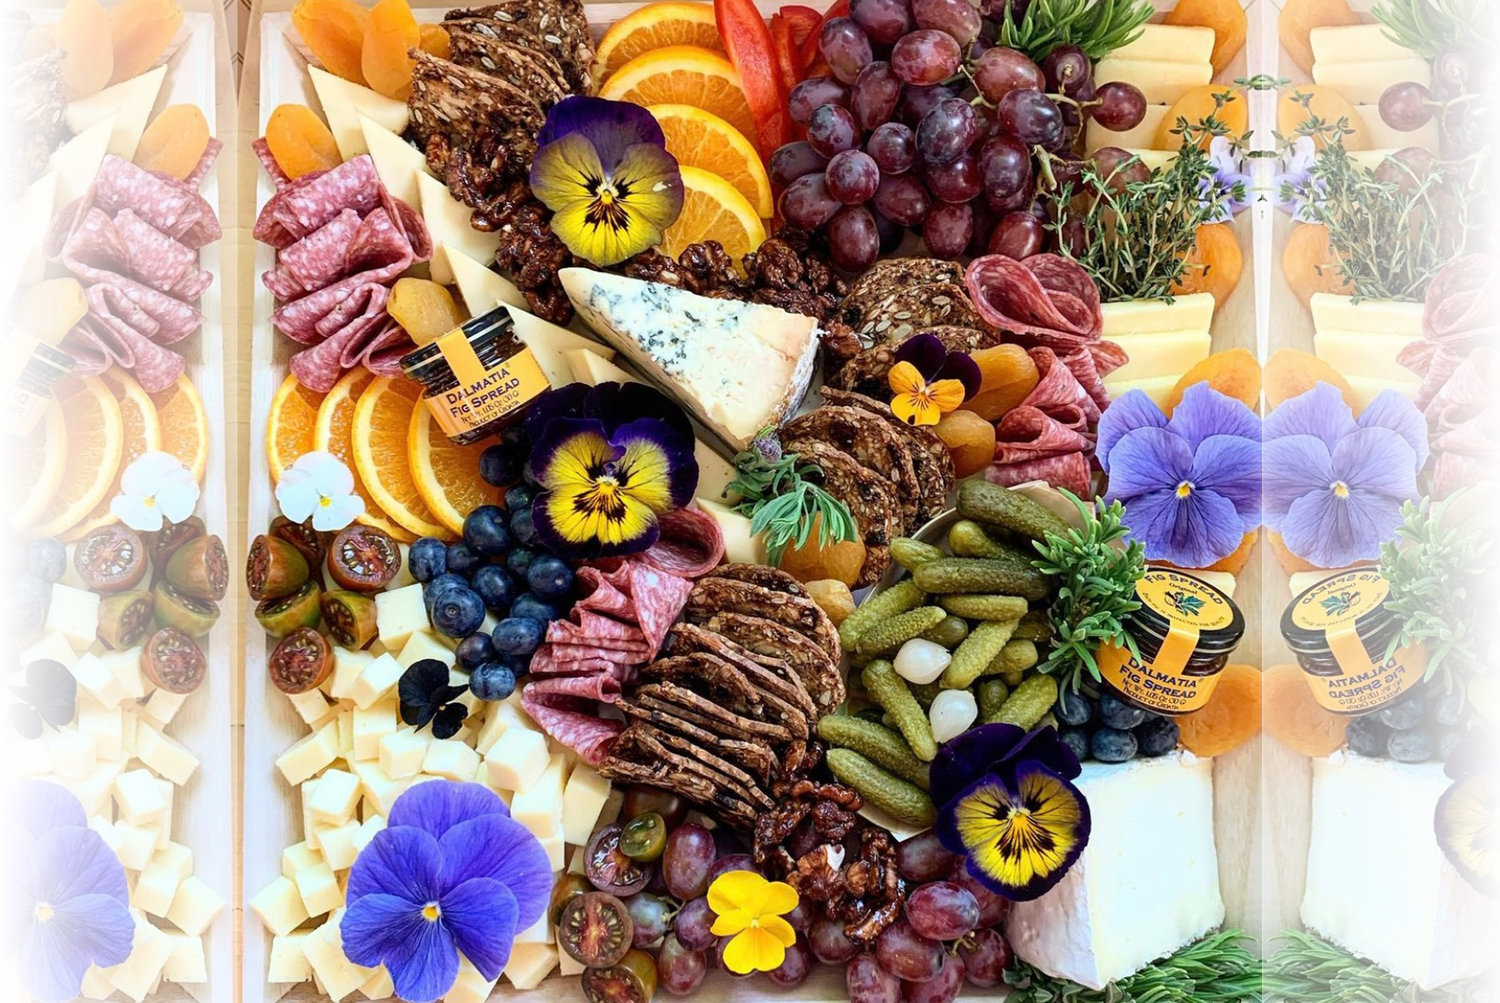 Grapes and Gourmet curates boards packed with sweet and savory snacks